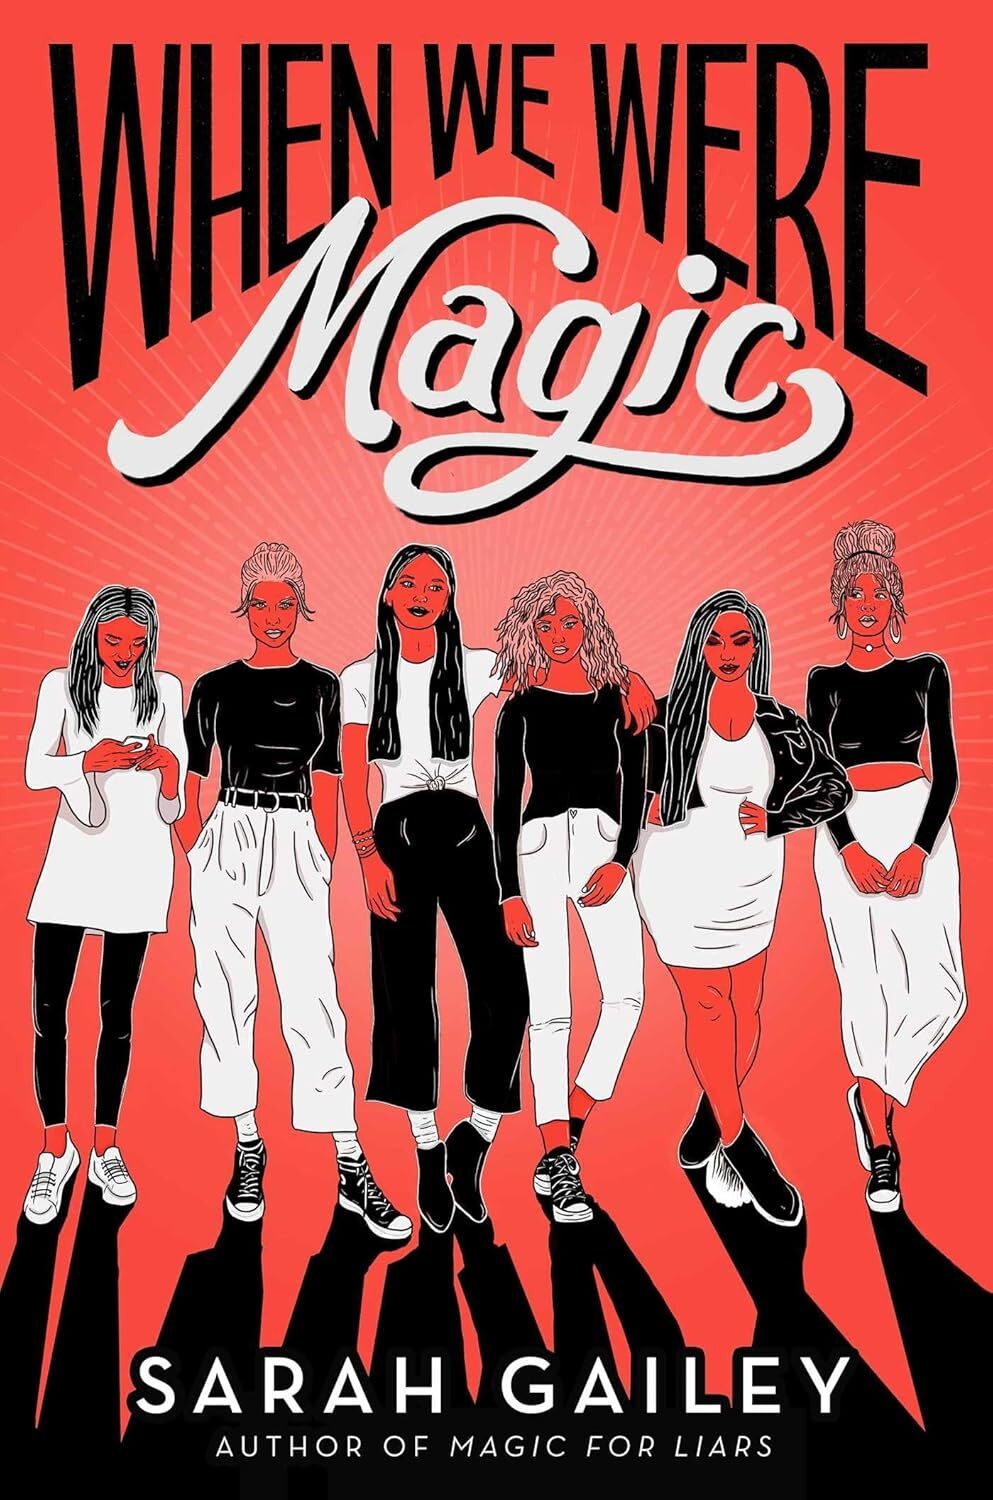 The cover of When We Were Magic by Sarah Gailey